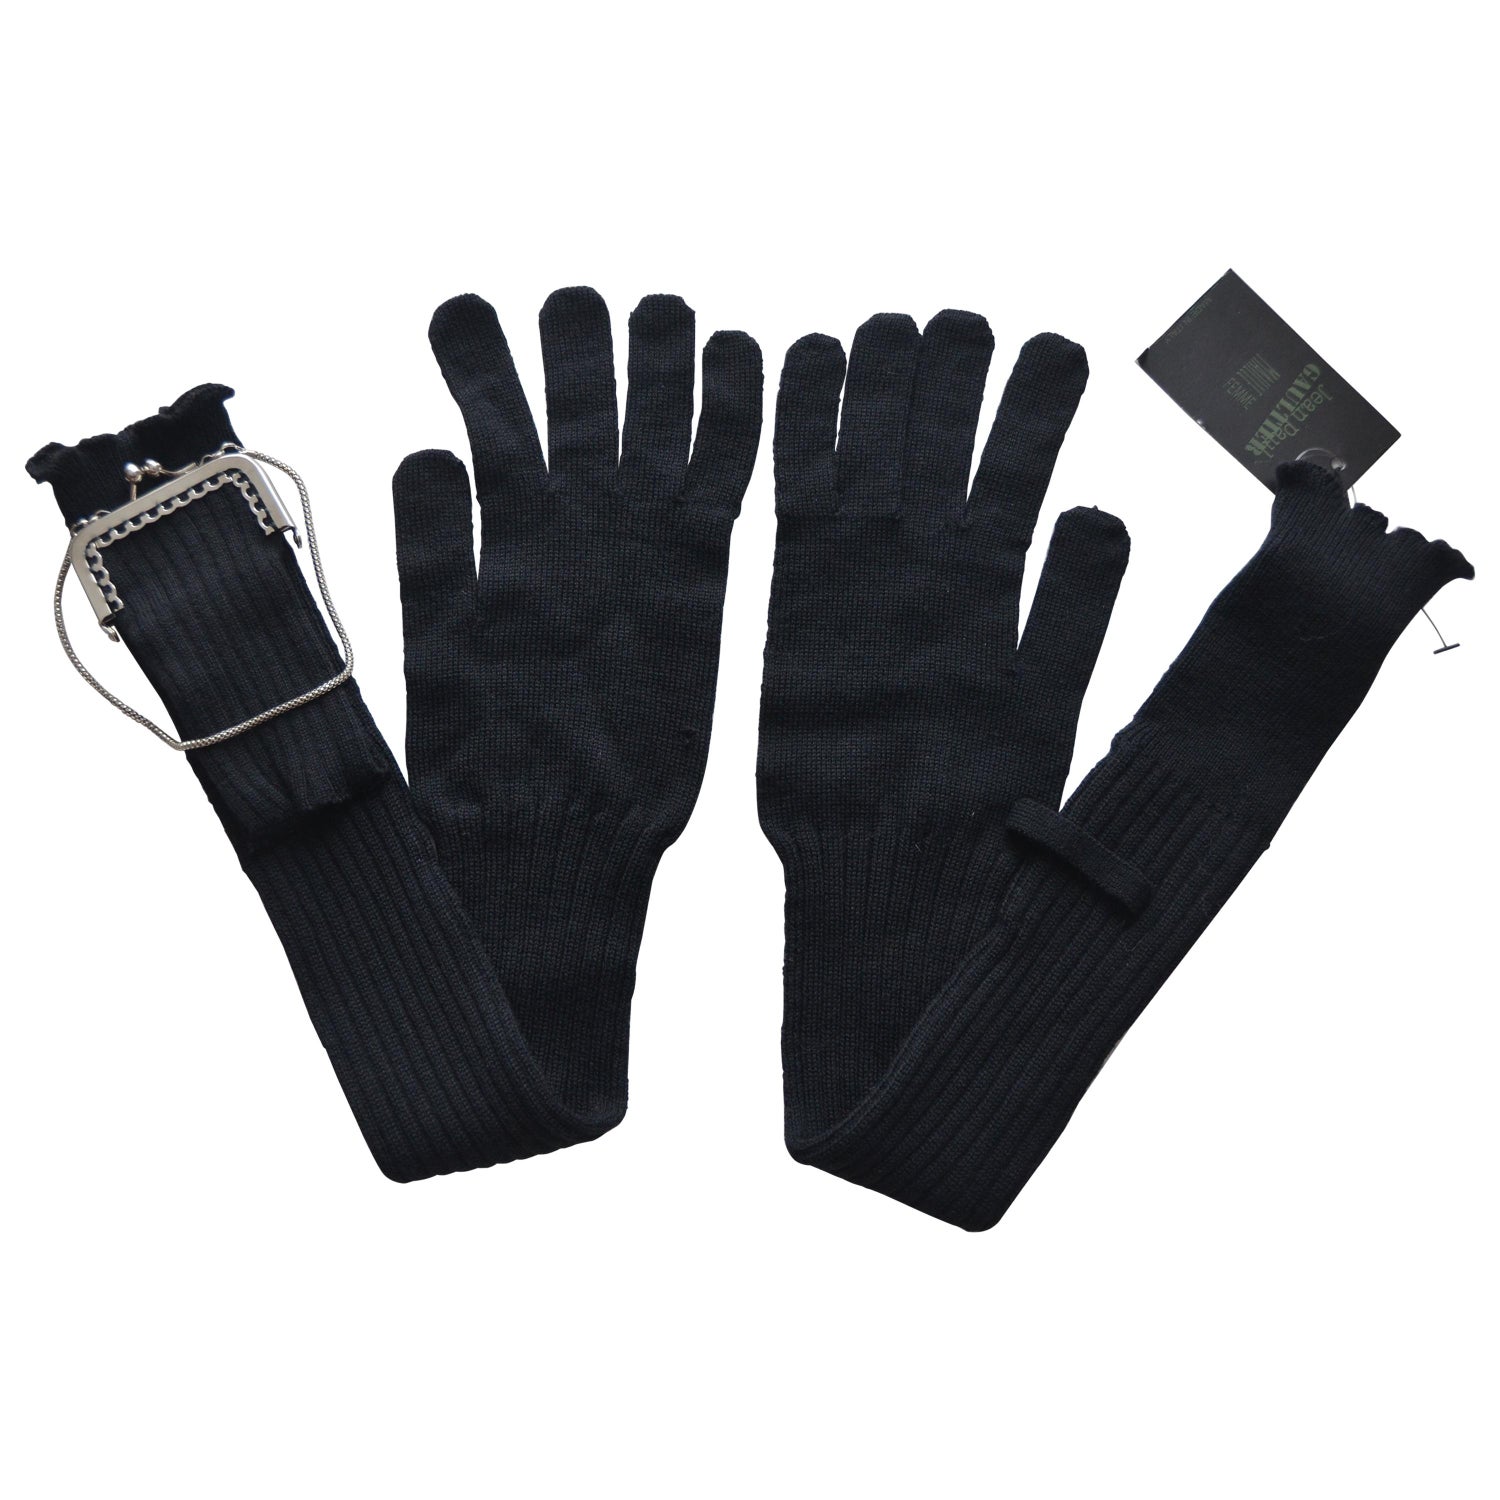 Chanel Runway Lambskin Gloves “THE LITTLE BLACK GLOVES” NEW at